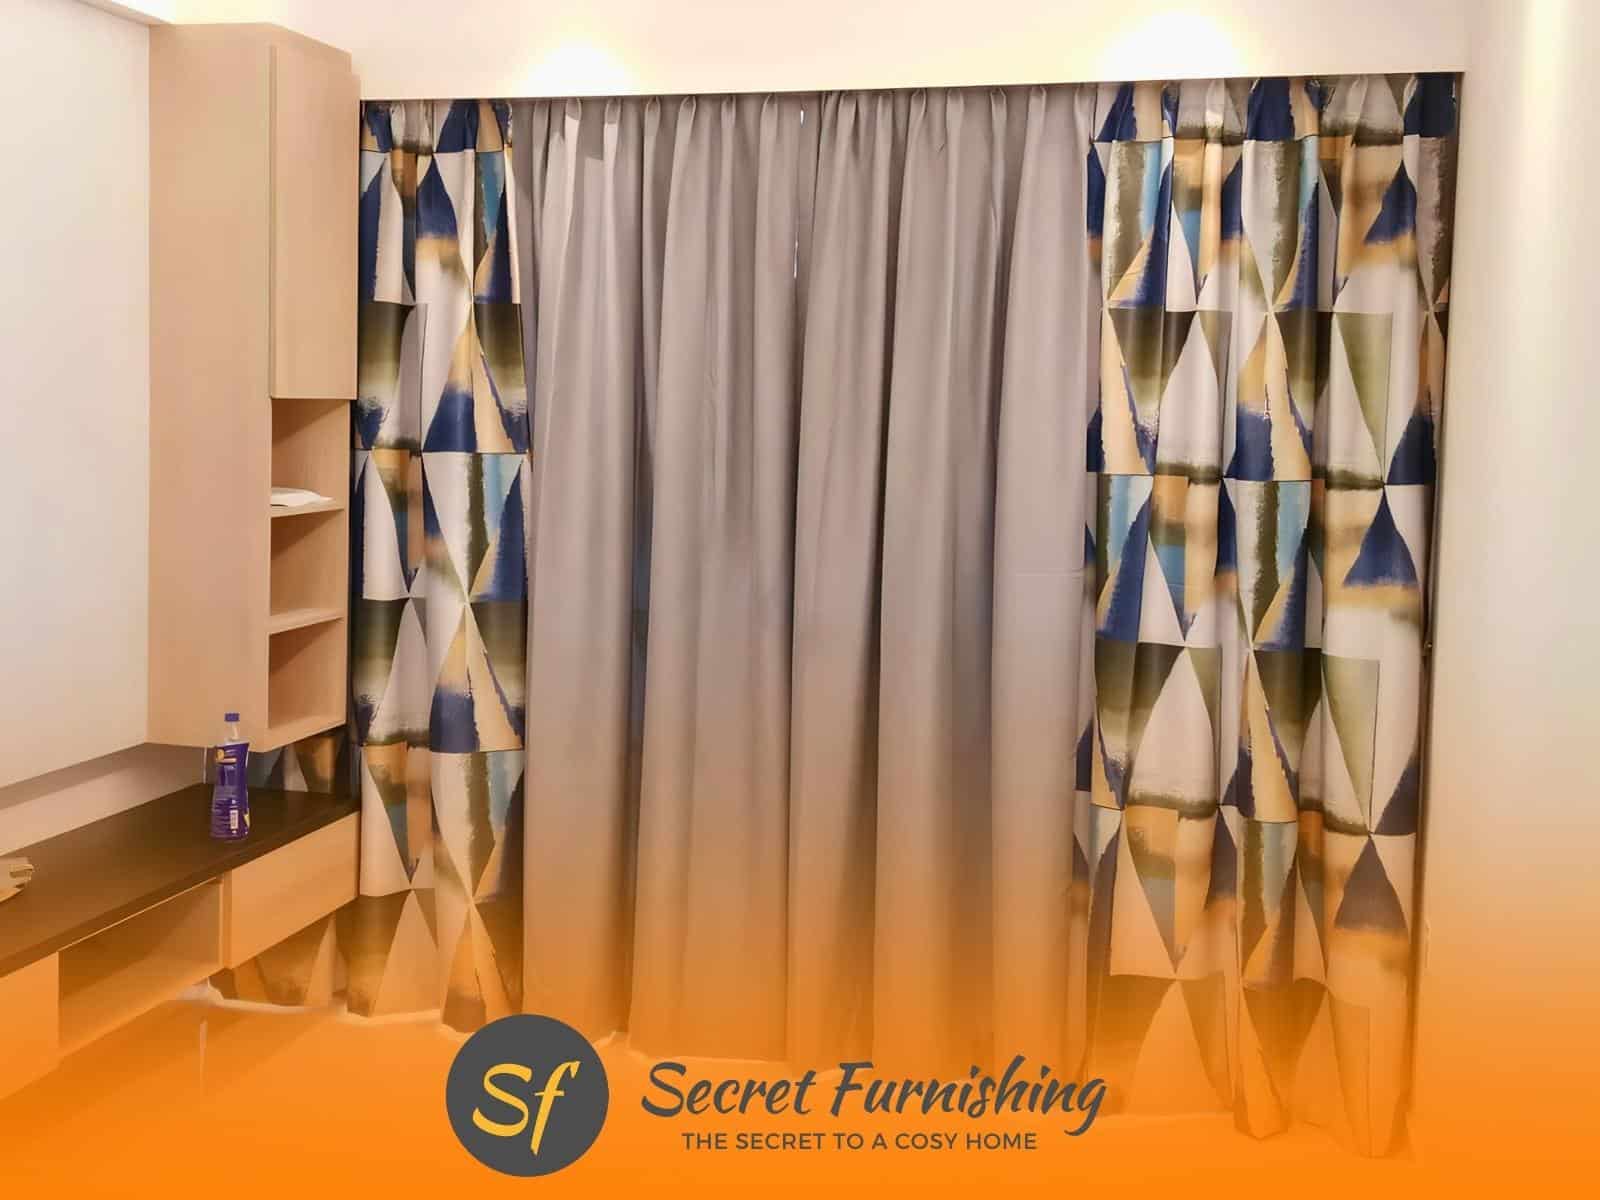 Renting curtains in Singapore